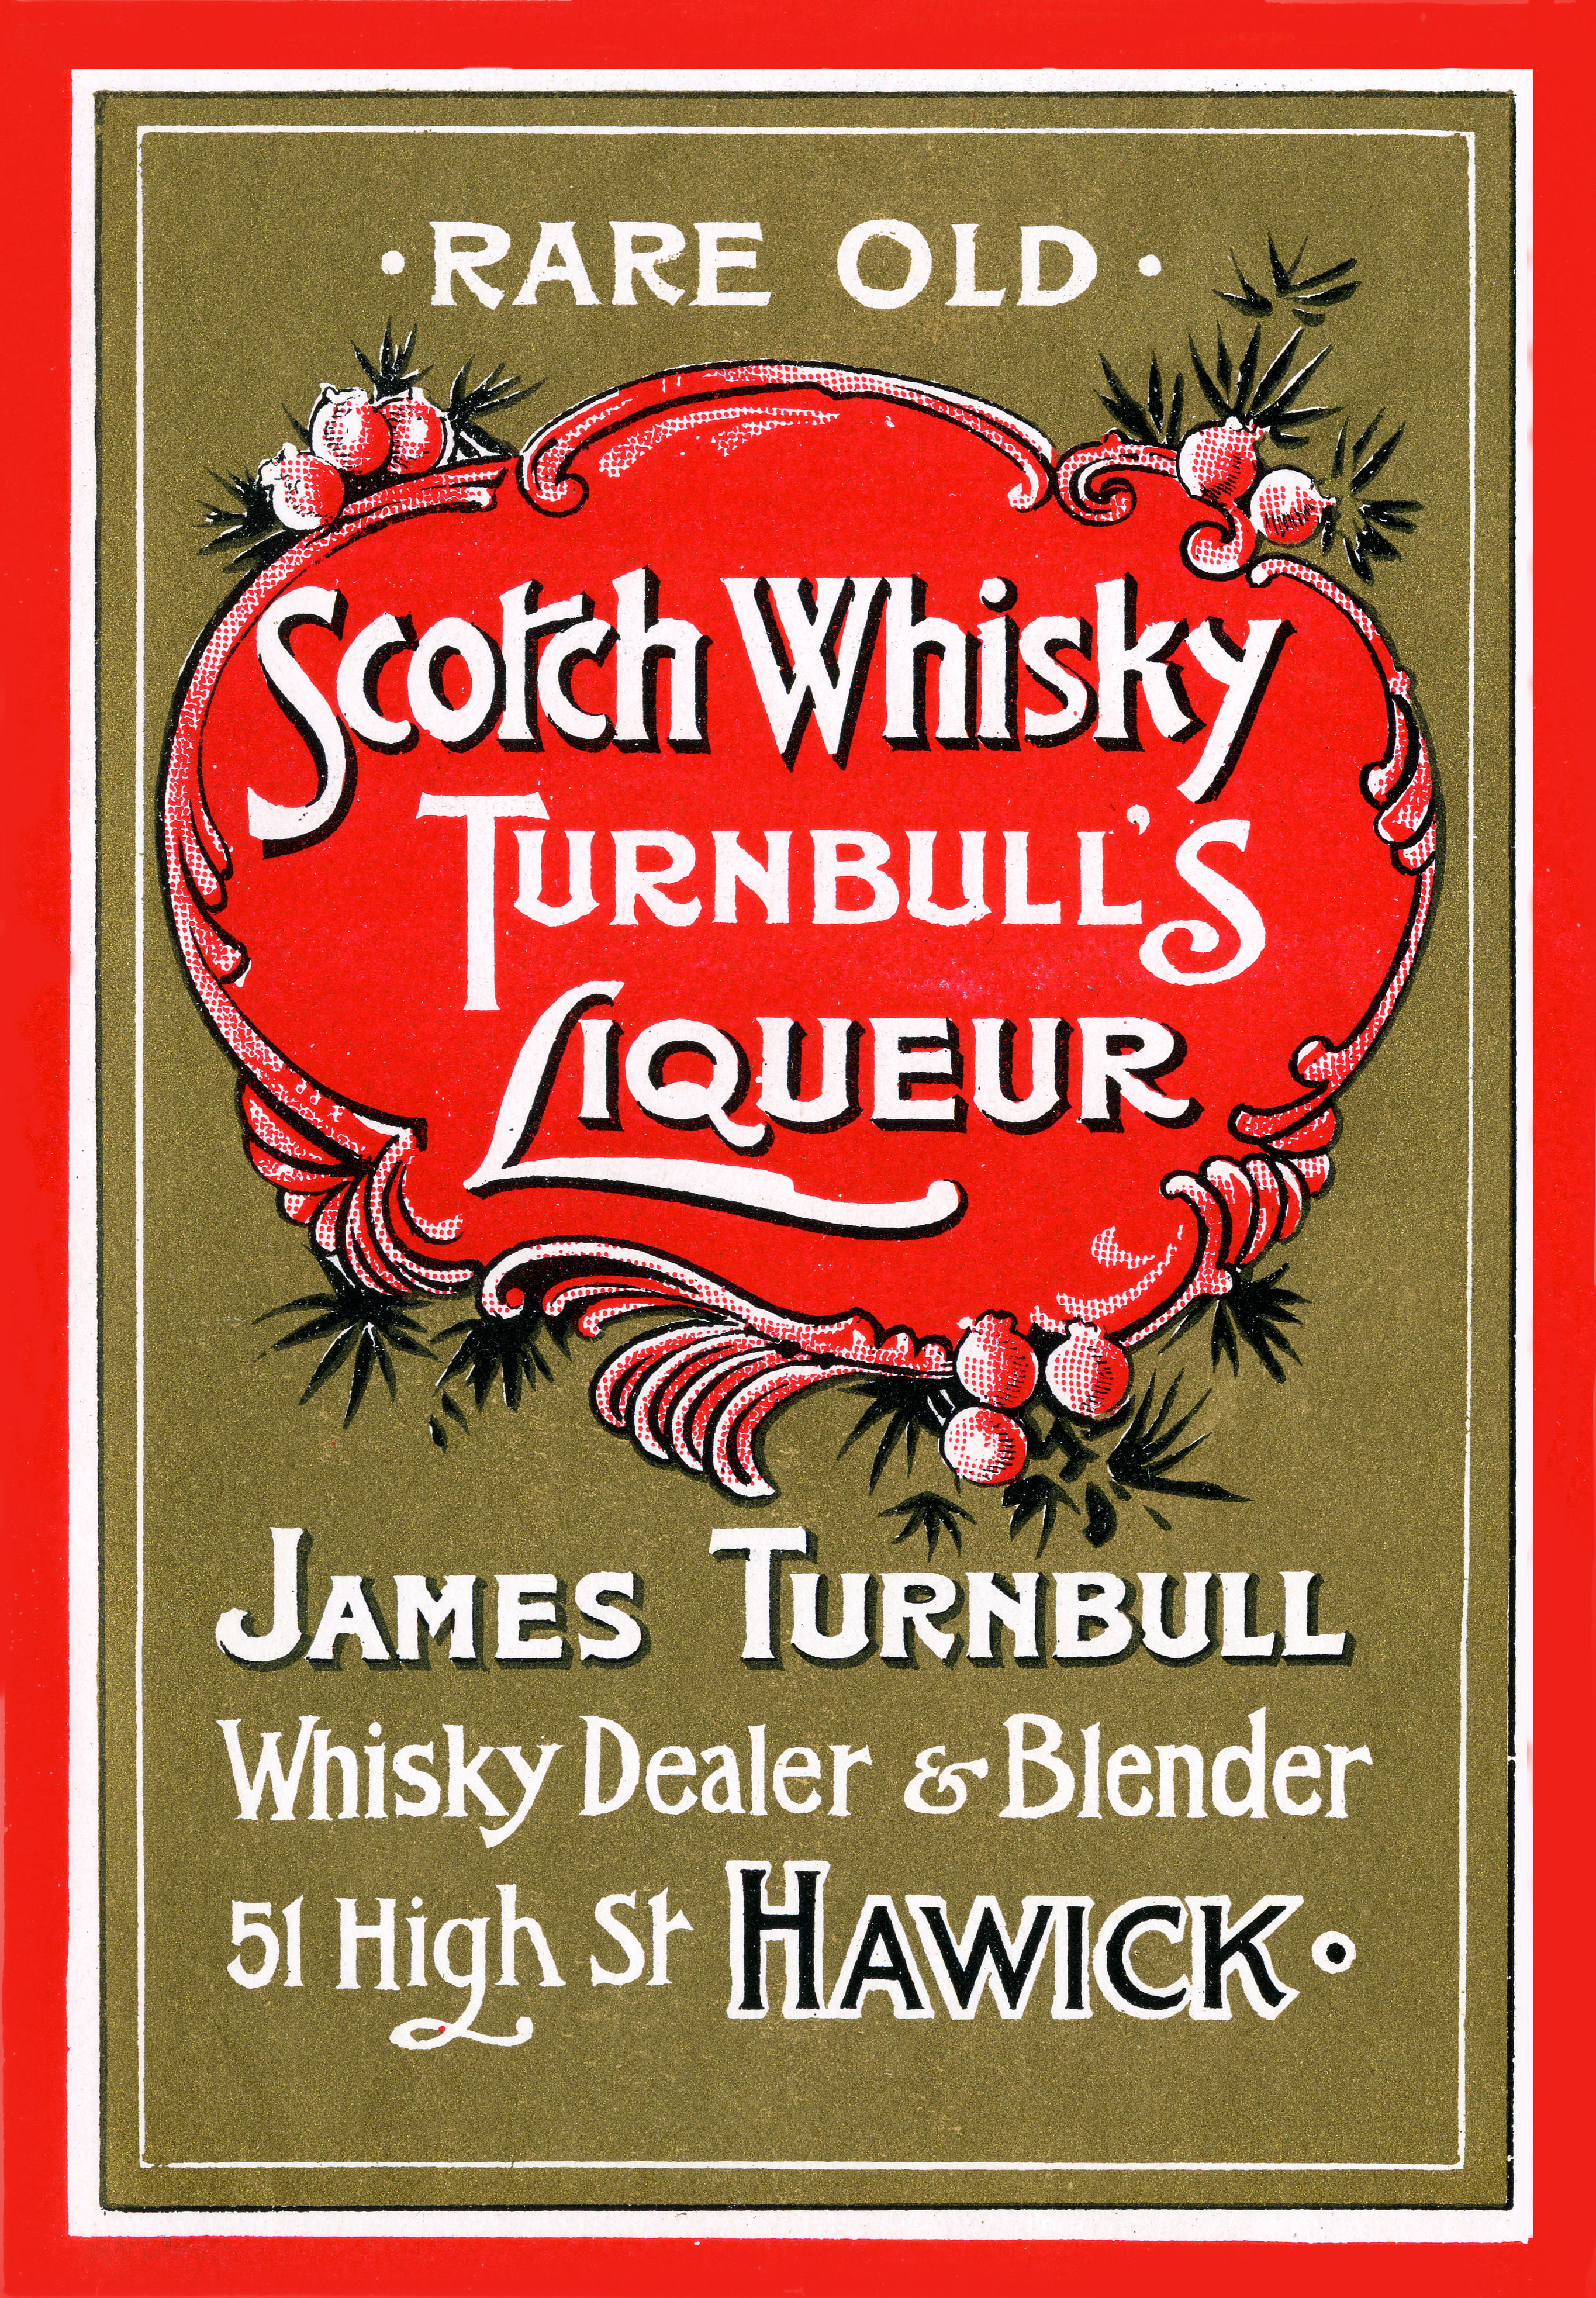 Scotch Whisky Turnbull’s Liqueur Label